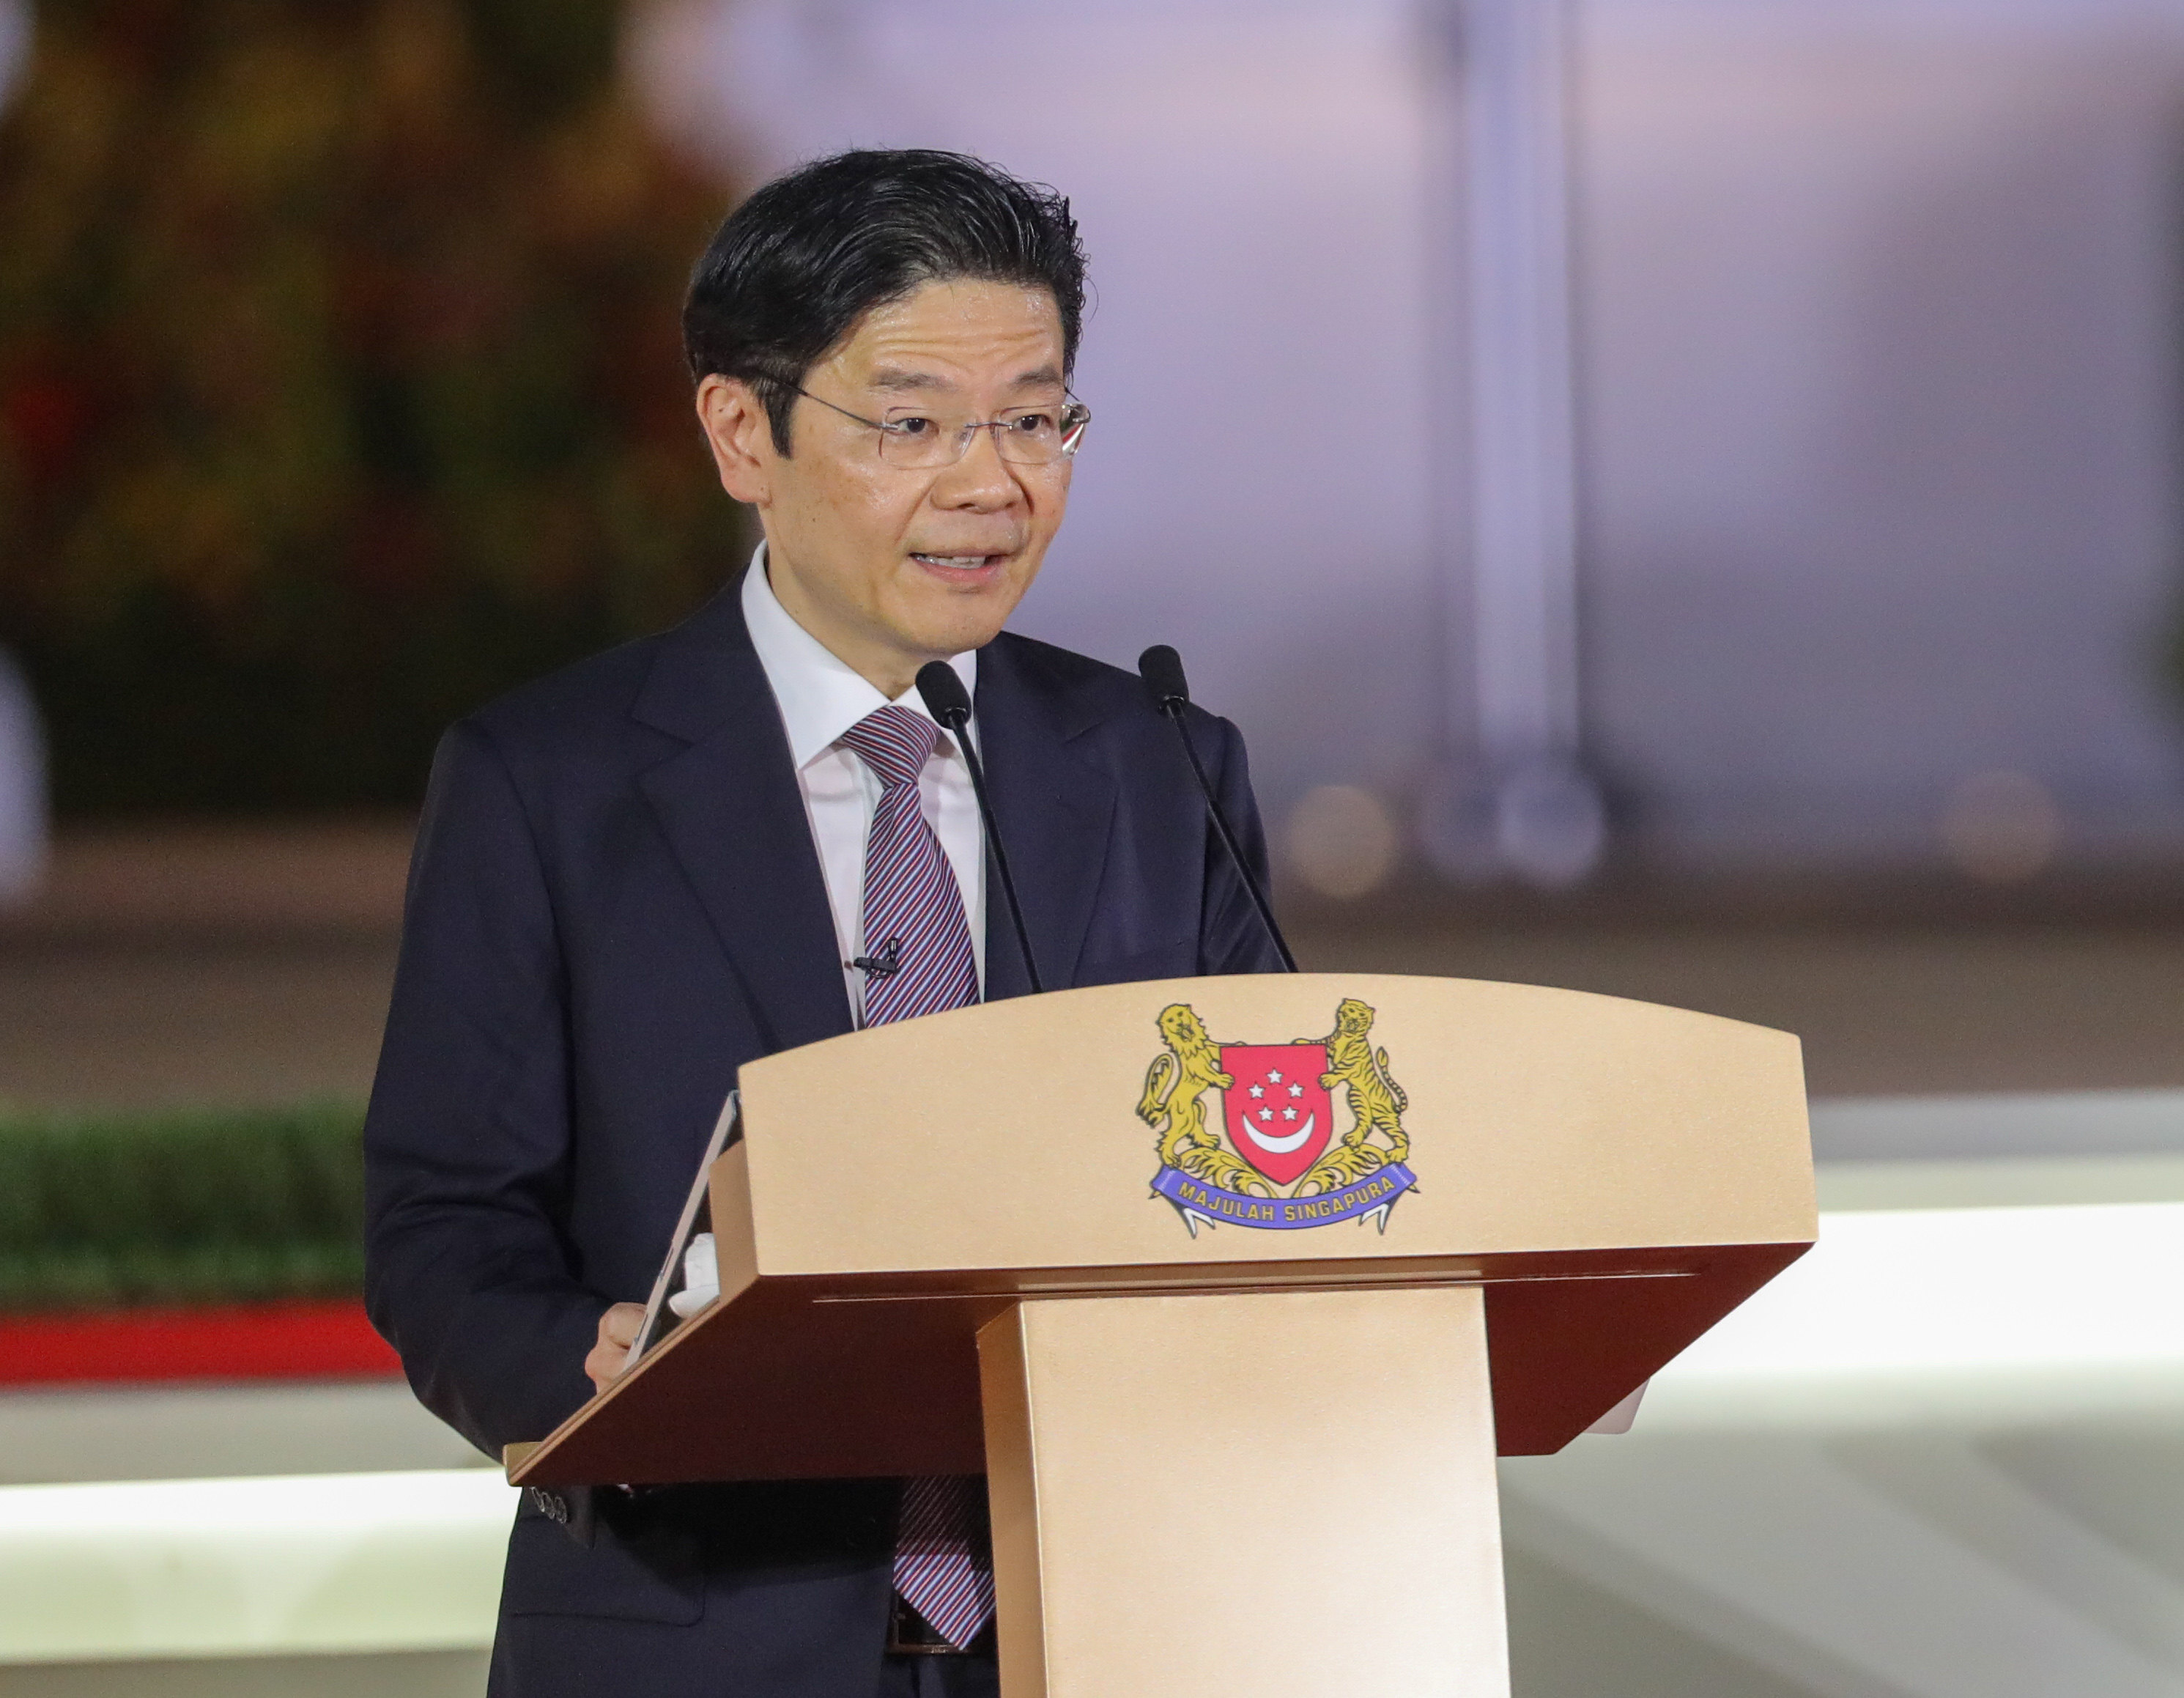 Lawrence Wong took his oath of office as Singapore’s fourth prime minister at the Istana, the country’s presidential palace. Photo: Handout via Xinhua